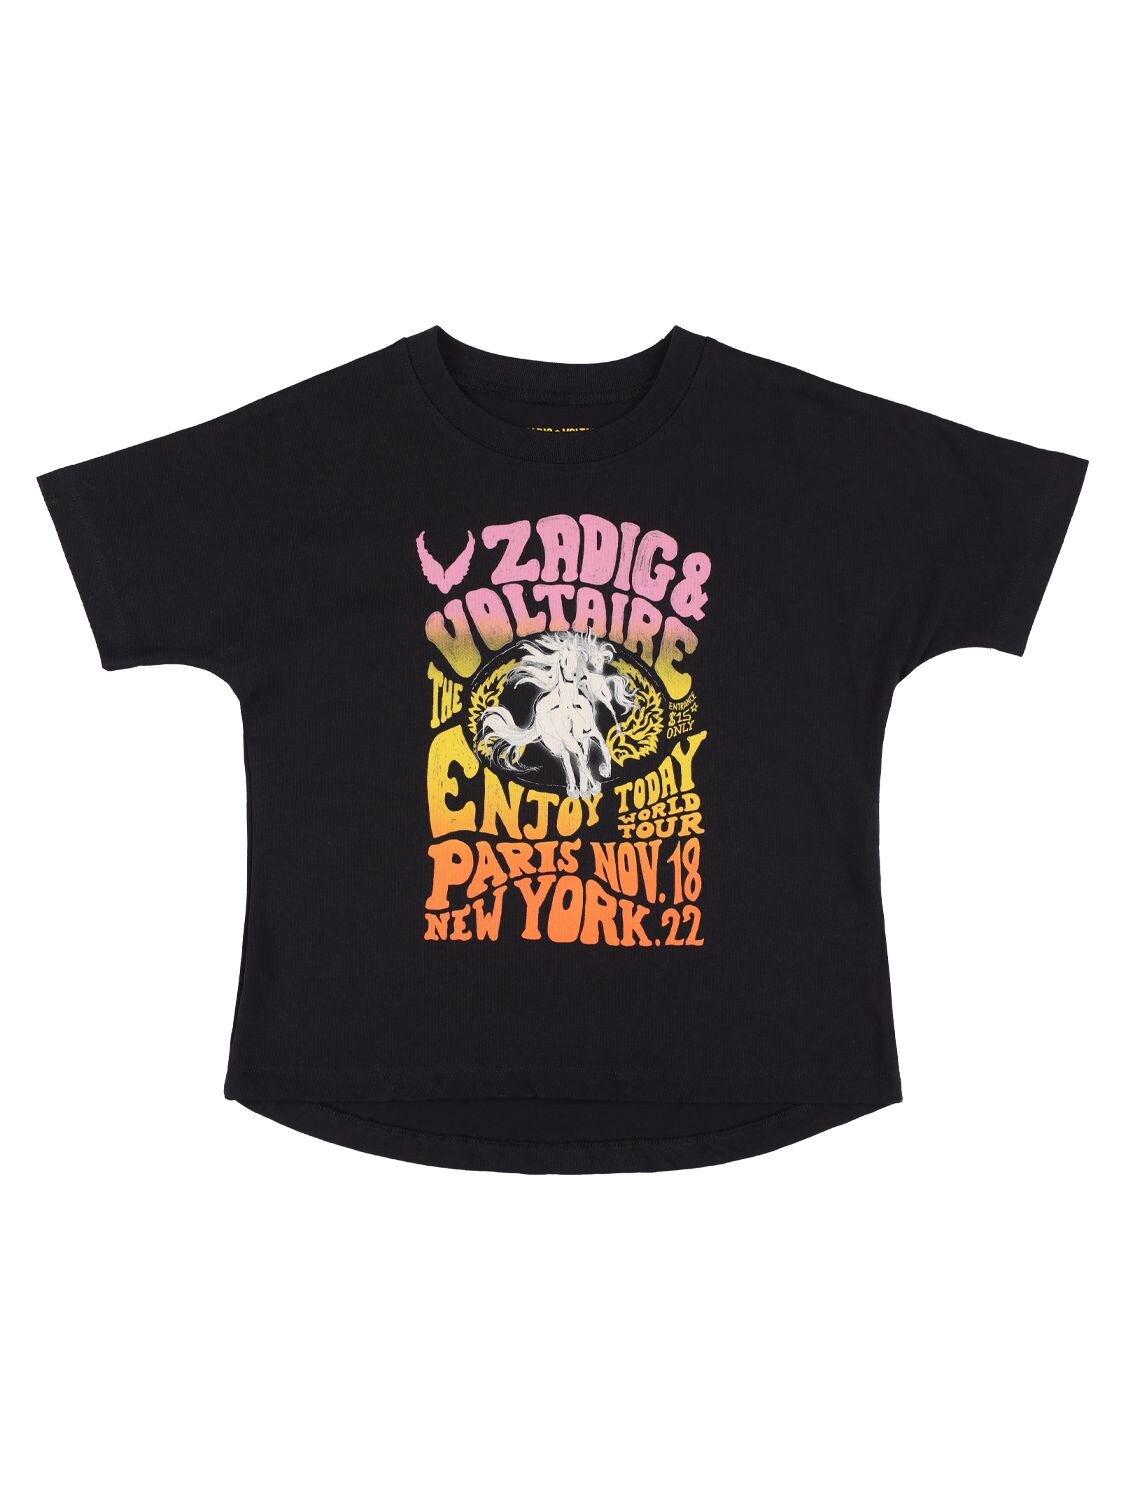 ZADIG & VOLTAIRE PRINTED ORGANIC COTTON T-SHIRT